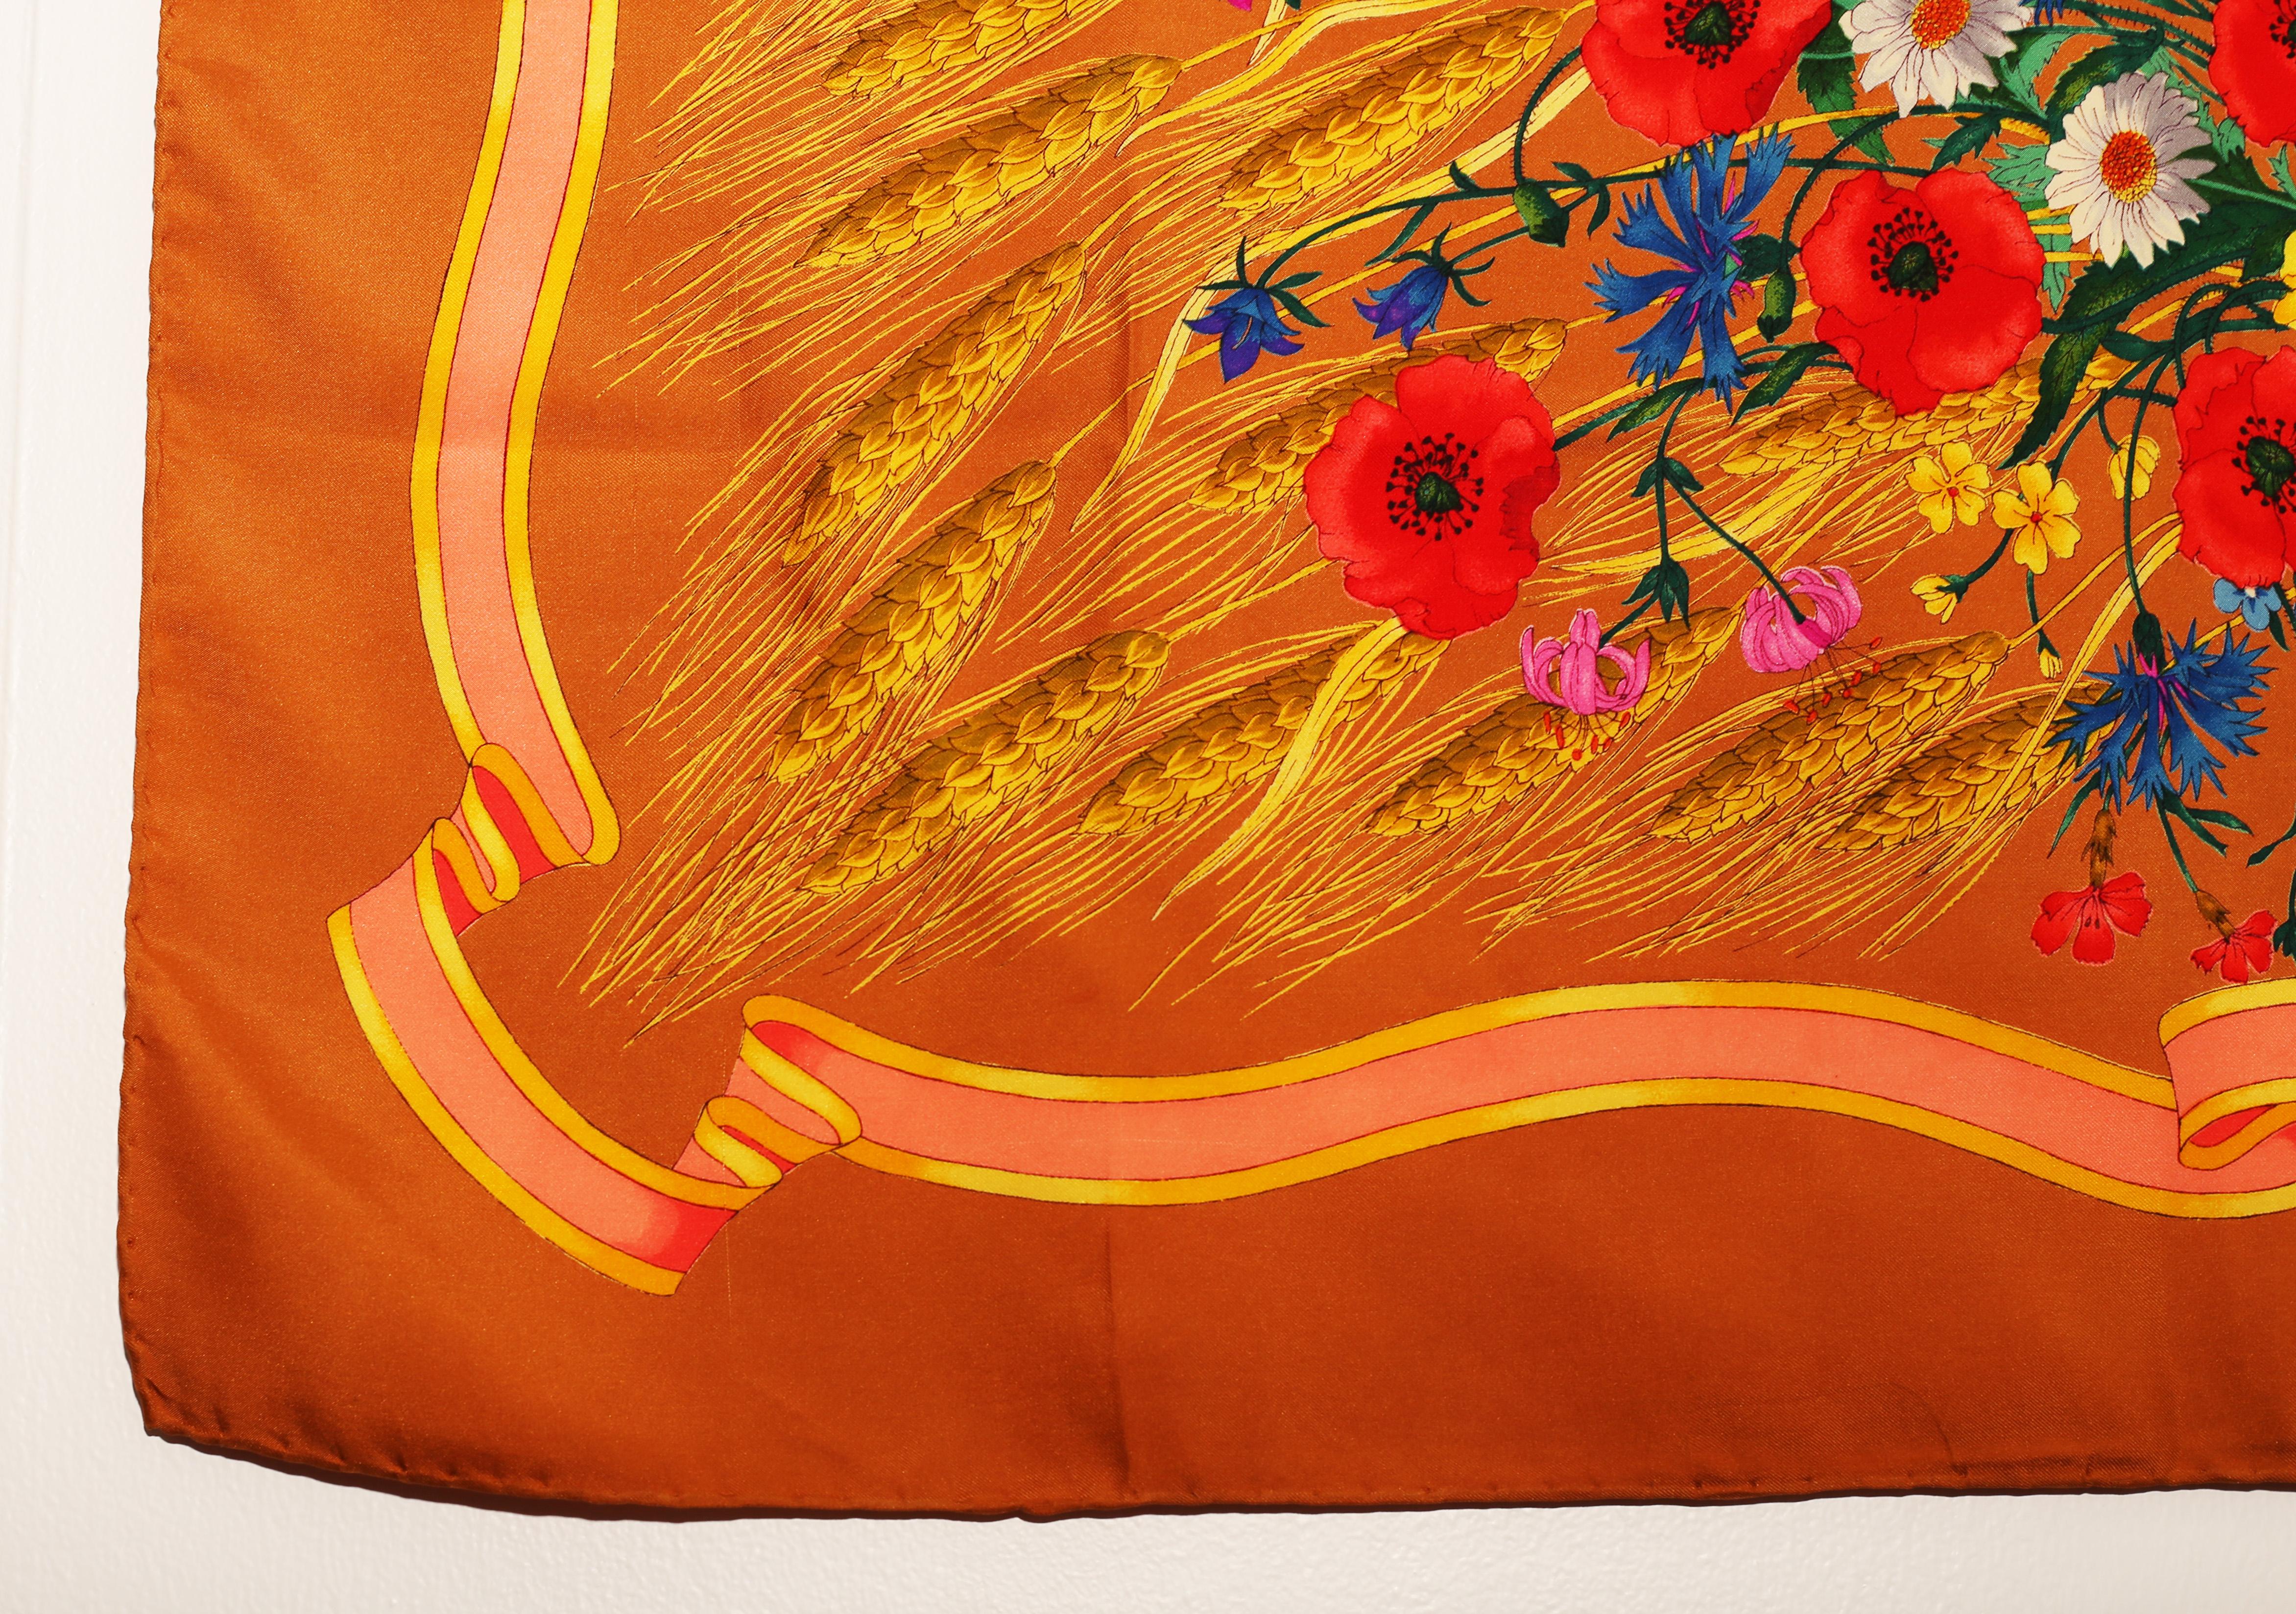 Early 1970's Scarf Spighe  Wheat  printed on silk, gorgeous bouquet of poppy flowers and wheat coming out of one corner and around it. illustrator Vittorio Accornero designed some iconic scarves for Gucci in the late 60s and 70s, and the label’s